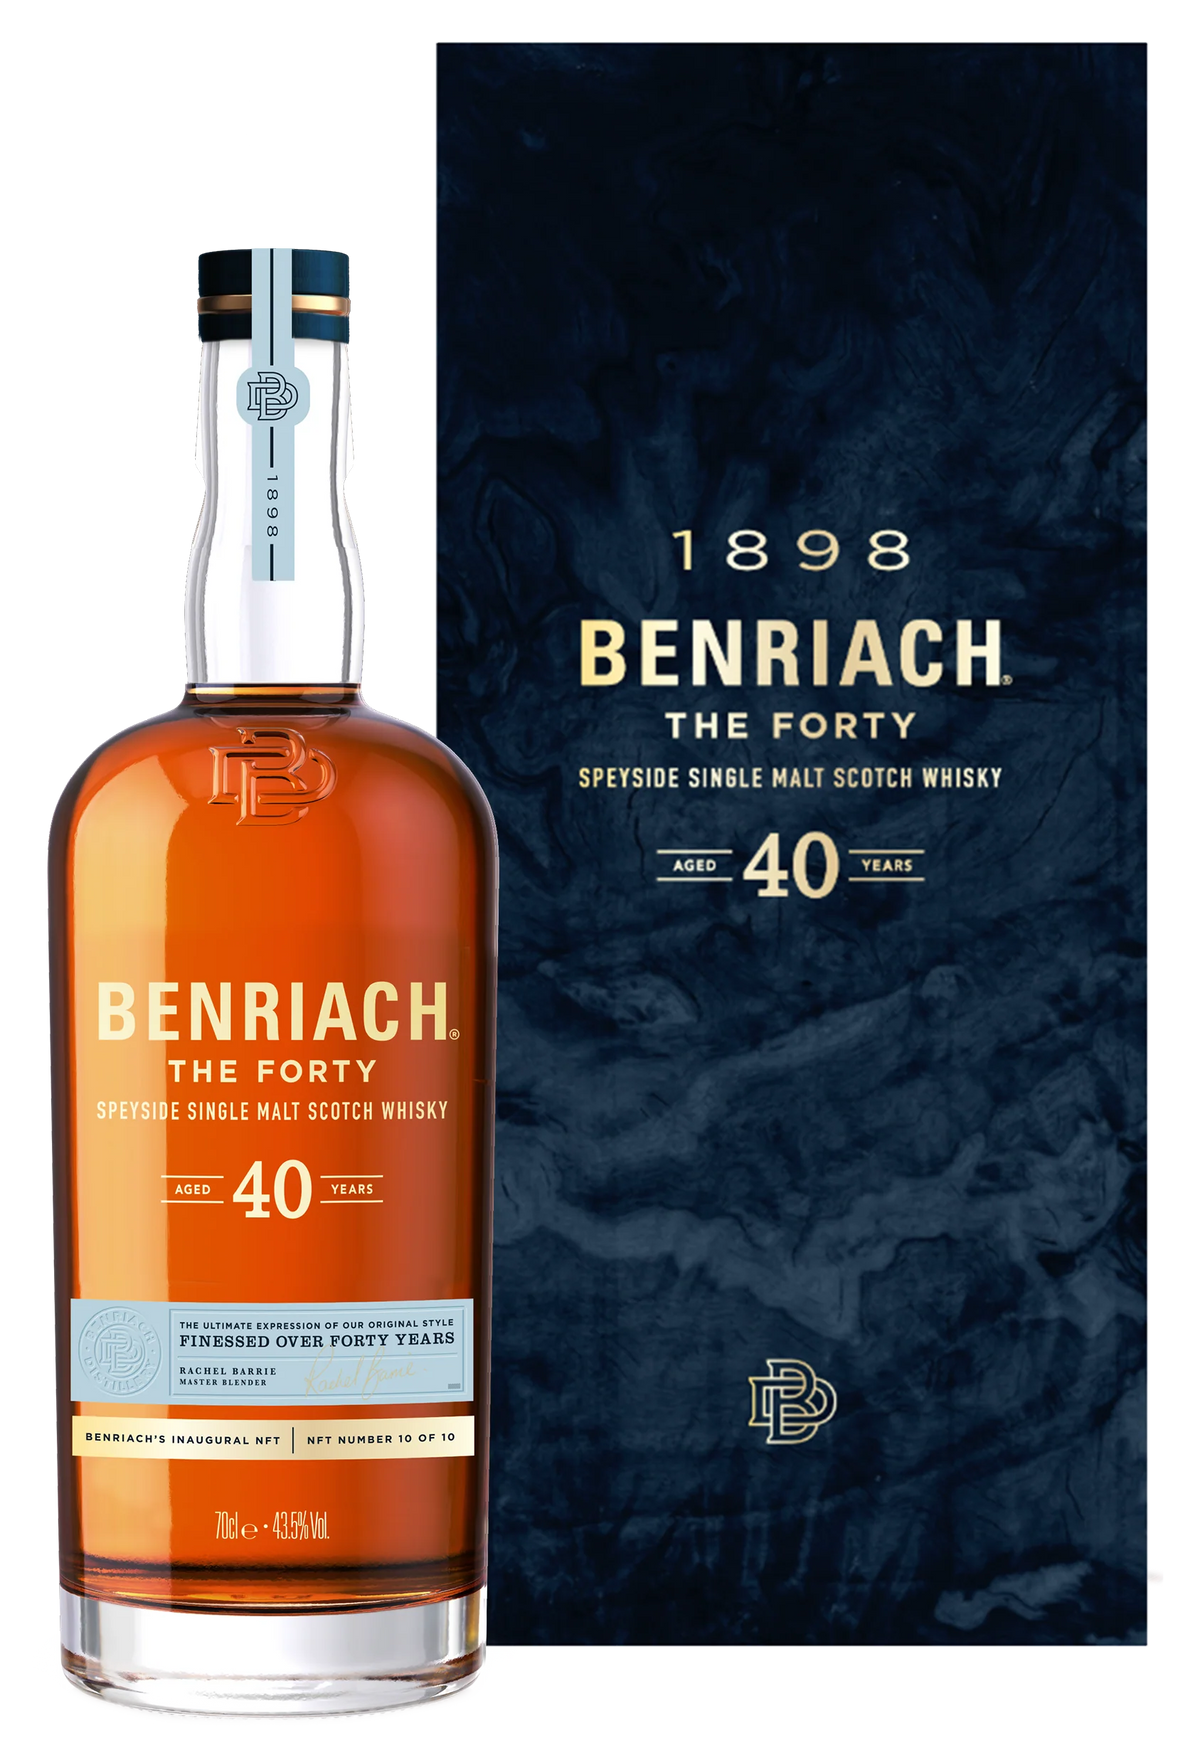 Benriach The Forty 40 Year Old Single Malt Scotch Whisky